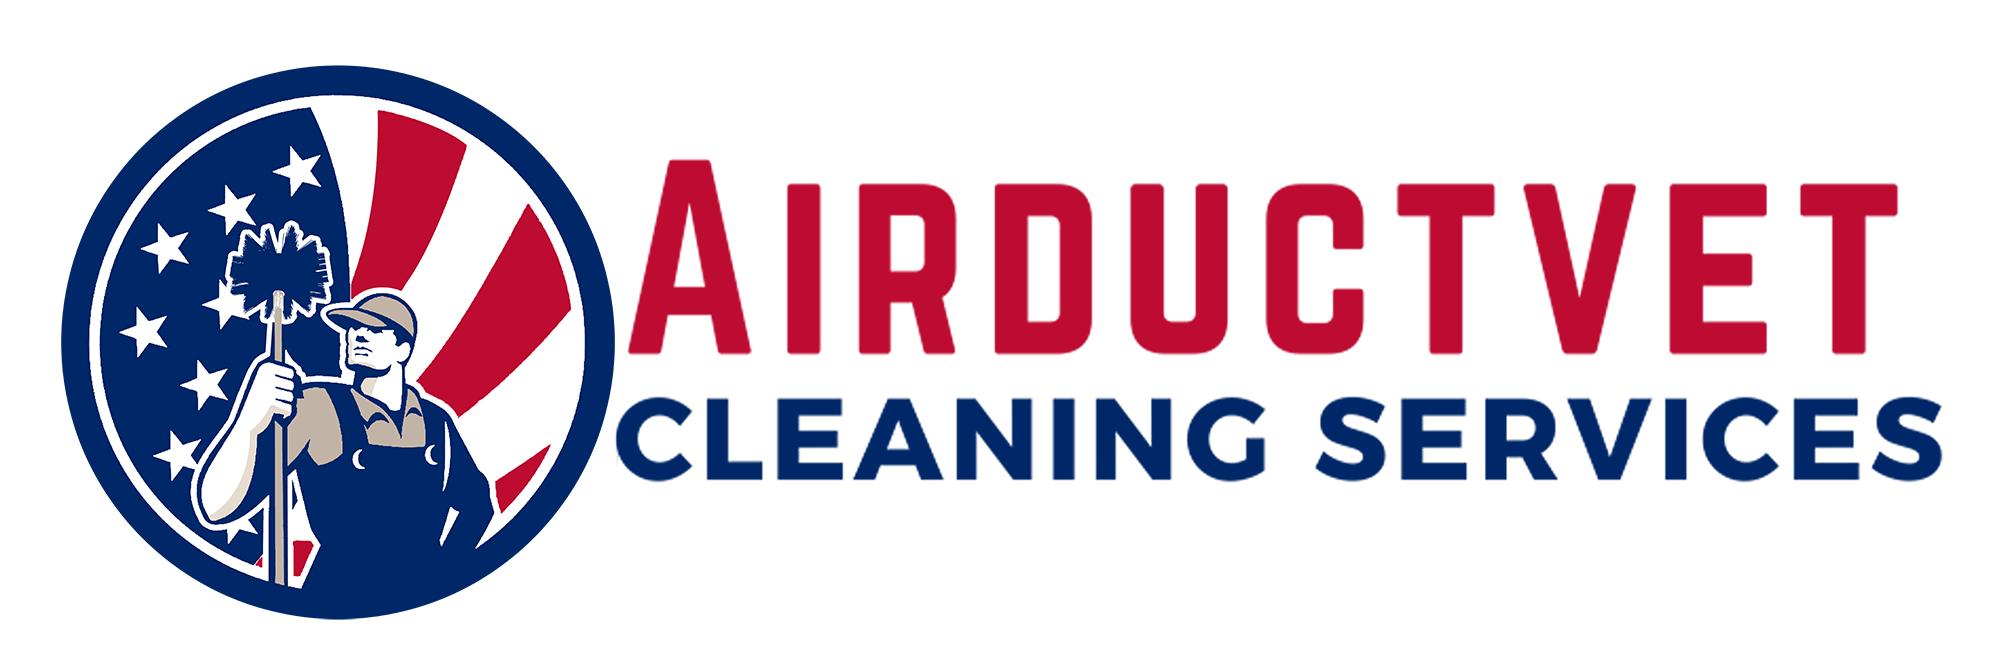 Air Duct, HVAC, Dryer Vent Cleaning, Chimney Sweep with AirDuctVet